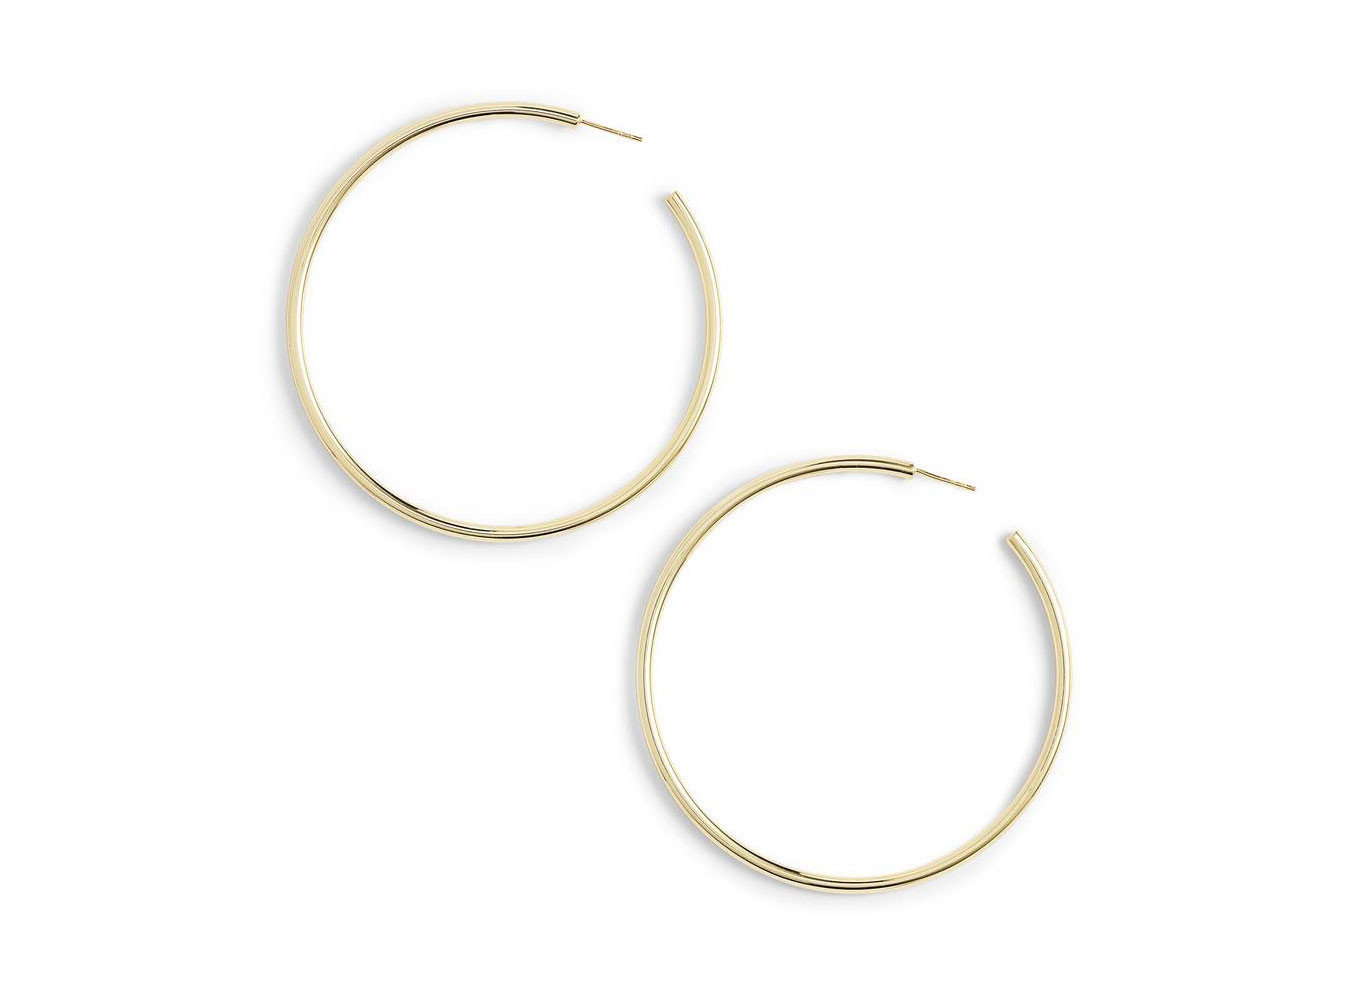 Celebs Style + Design Travel Shop earrings fashion accessory jewellery body jewelry silver material metal circle product design jewelry making bangle